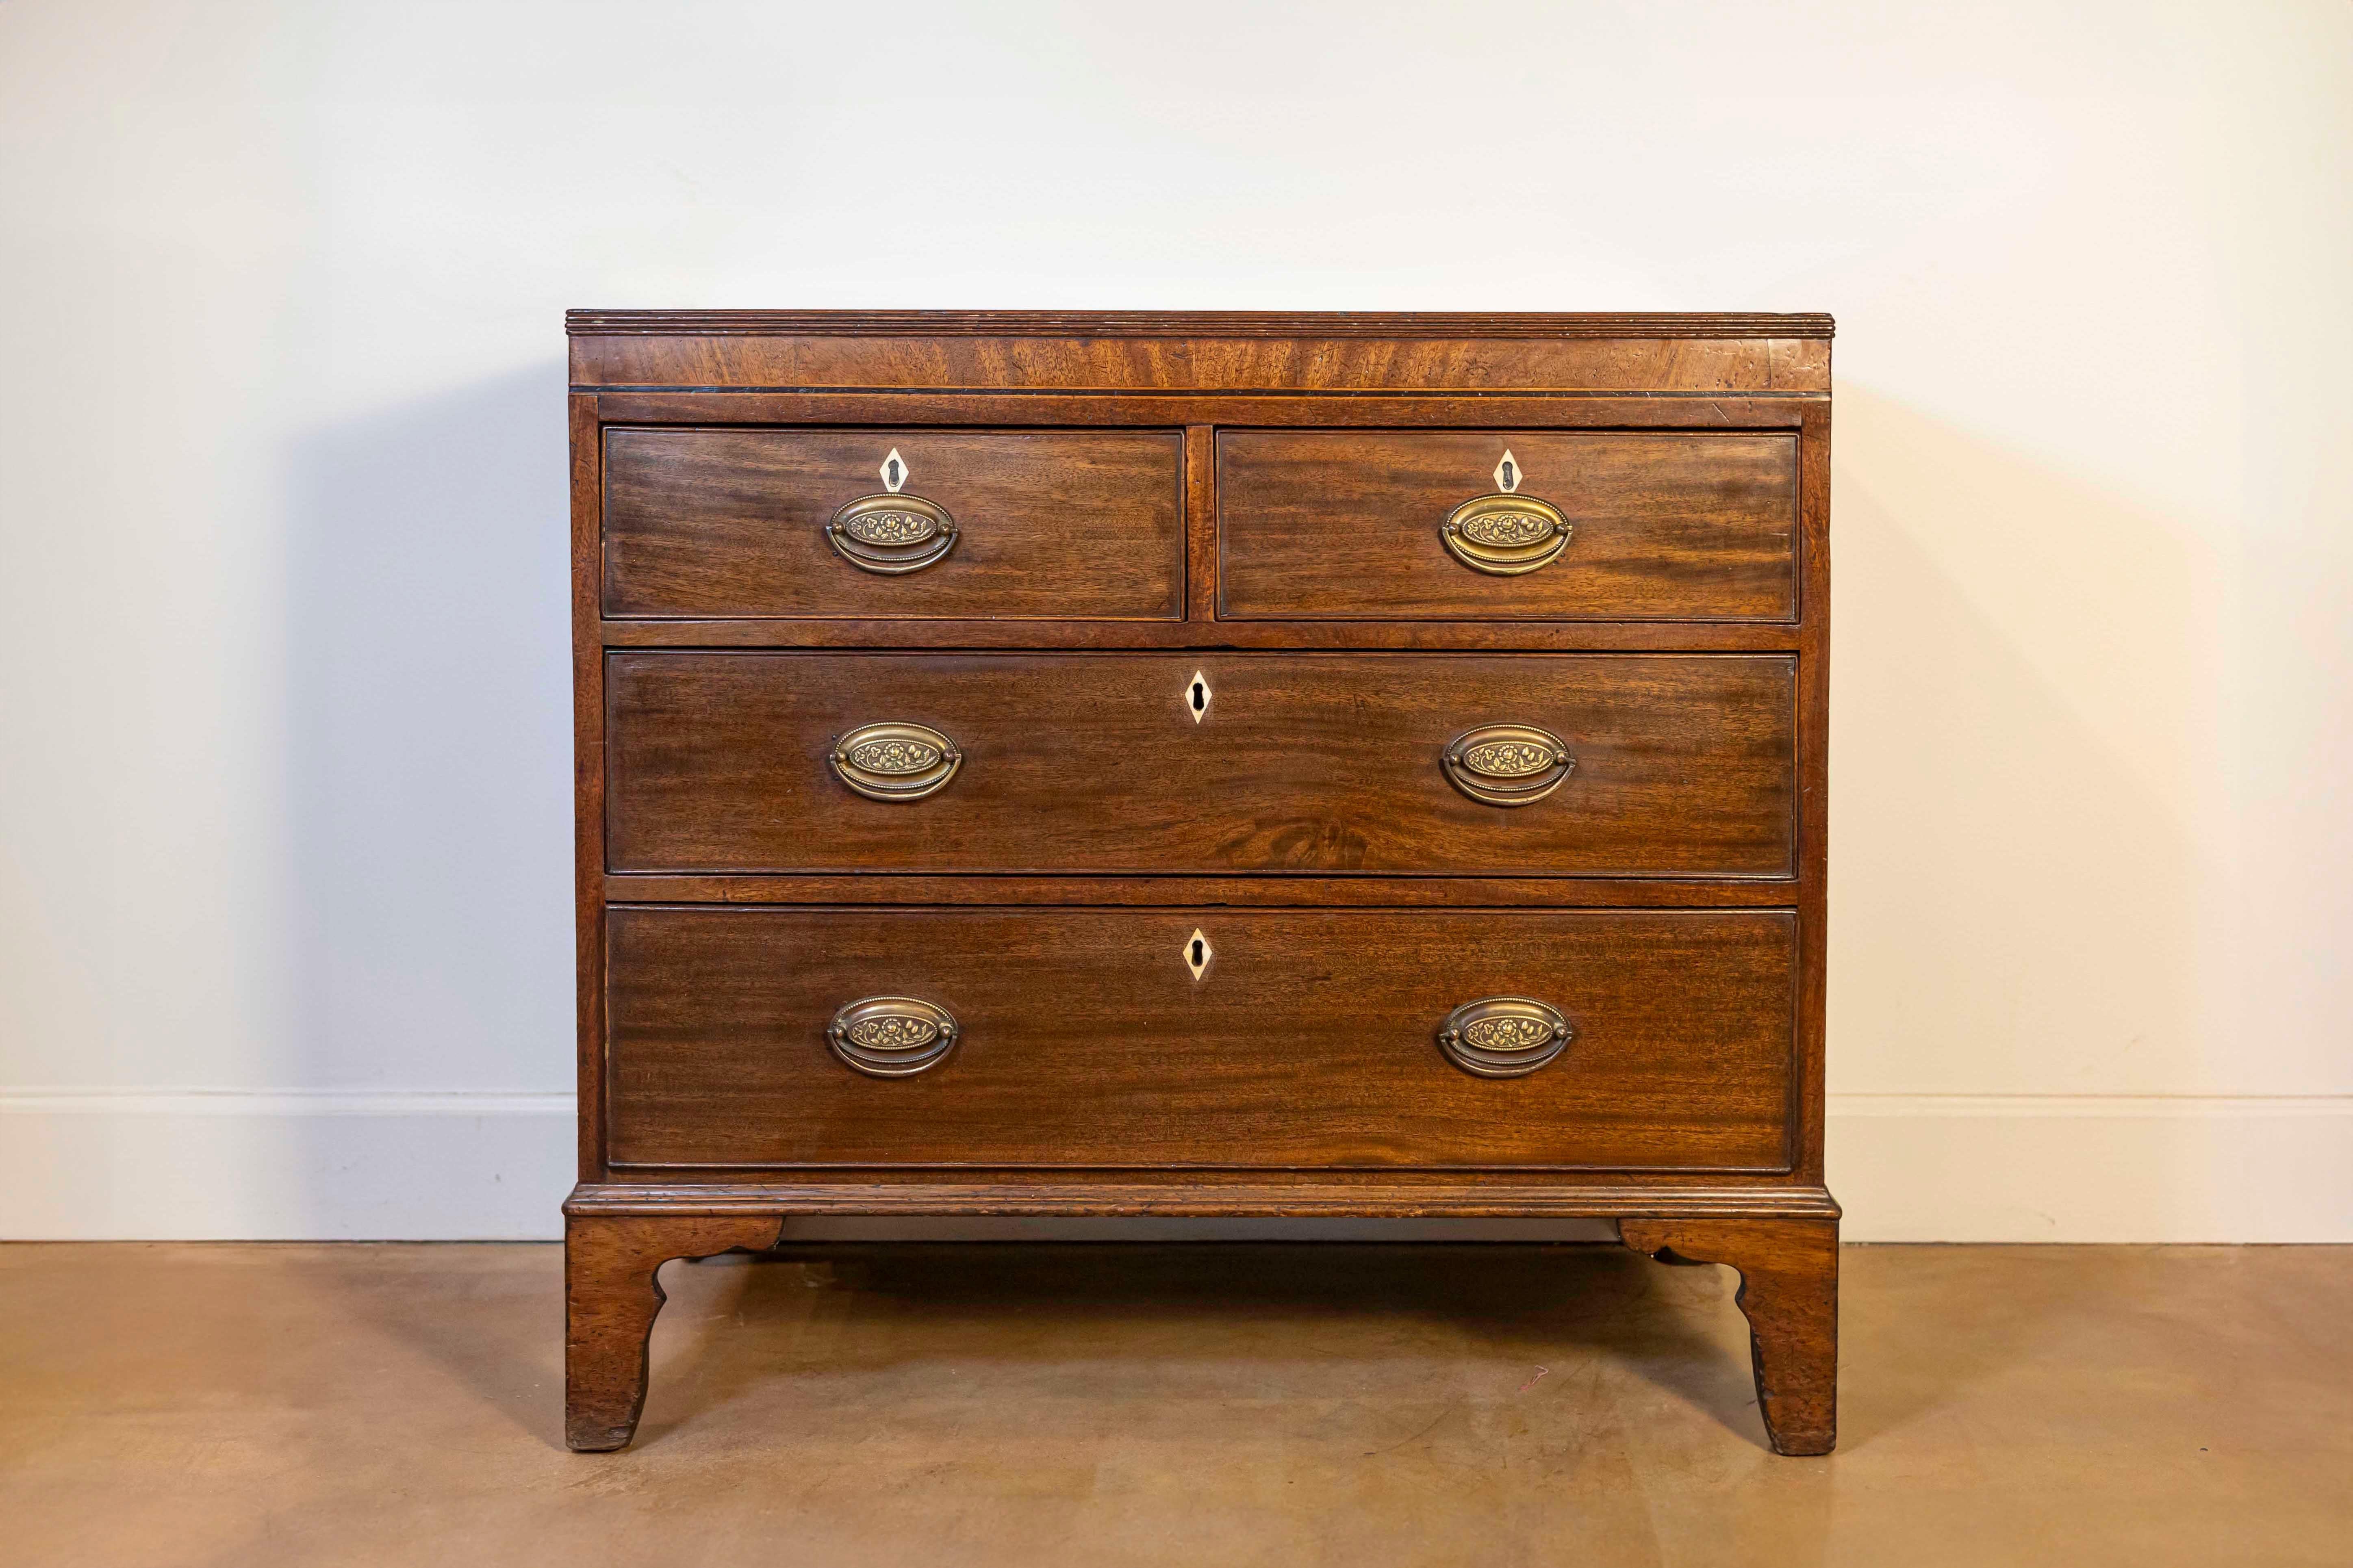 An English Georgian style walnut four-drawer chest from the 20th century with carved legs. This exquisite English Georgian style walnut four-drawer chest, dating back to the 20th century, exudes elegance and fine craftsmanship. Originating from a